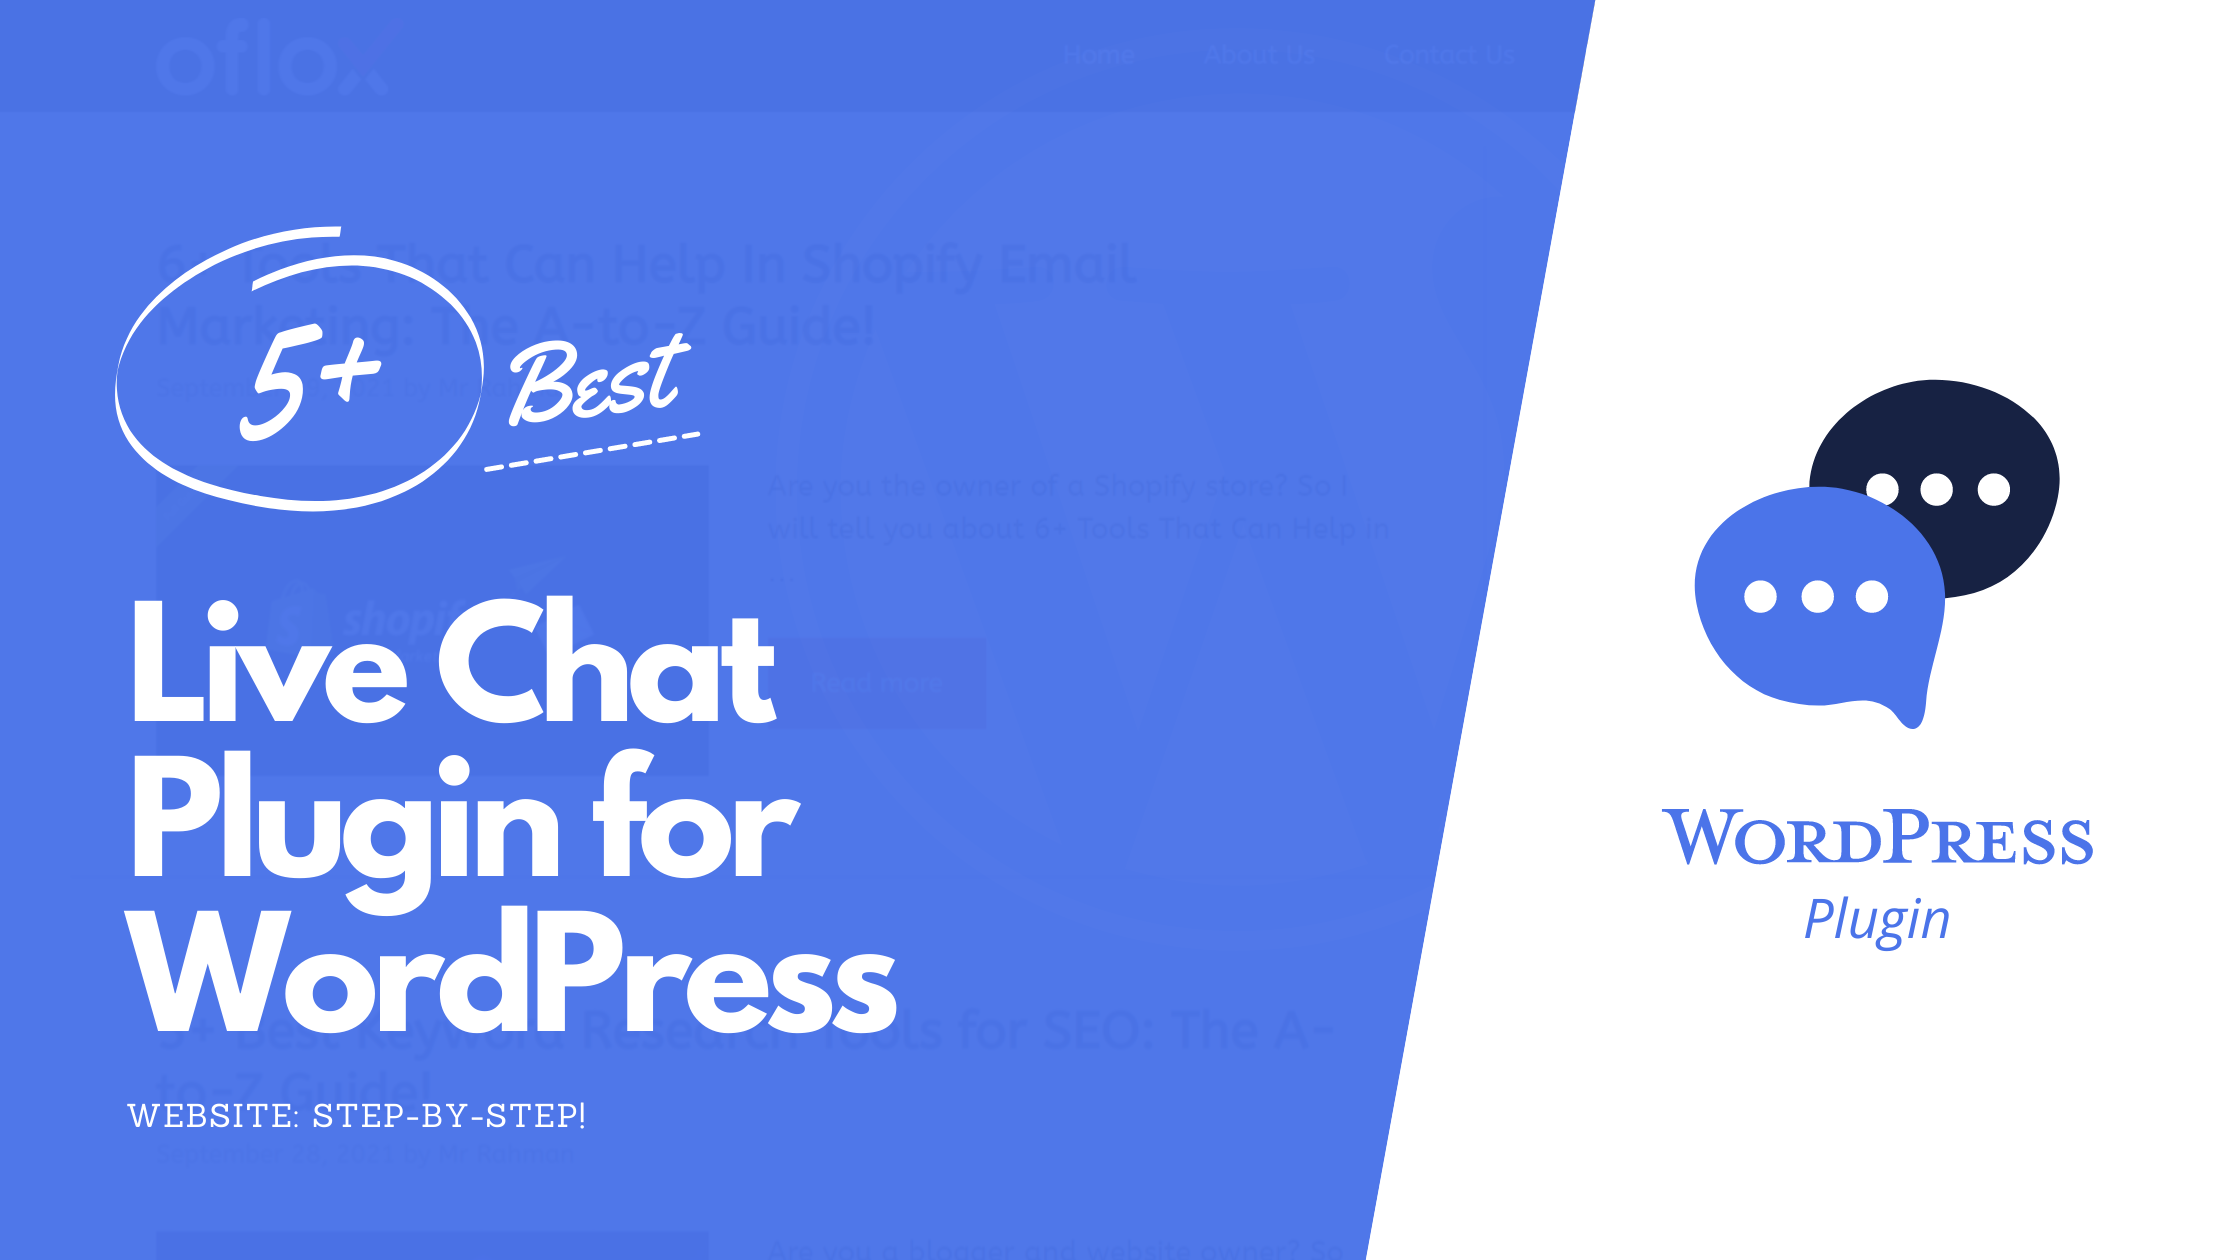 Best Live Chat Plugin for WordPress